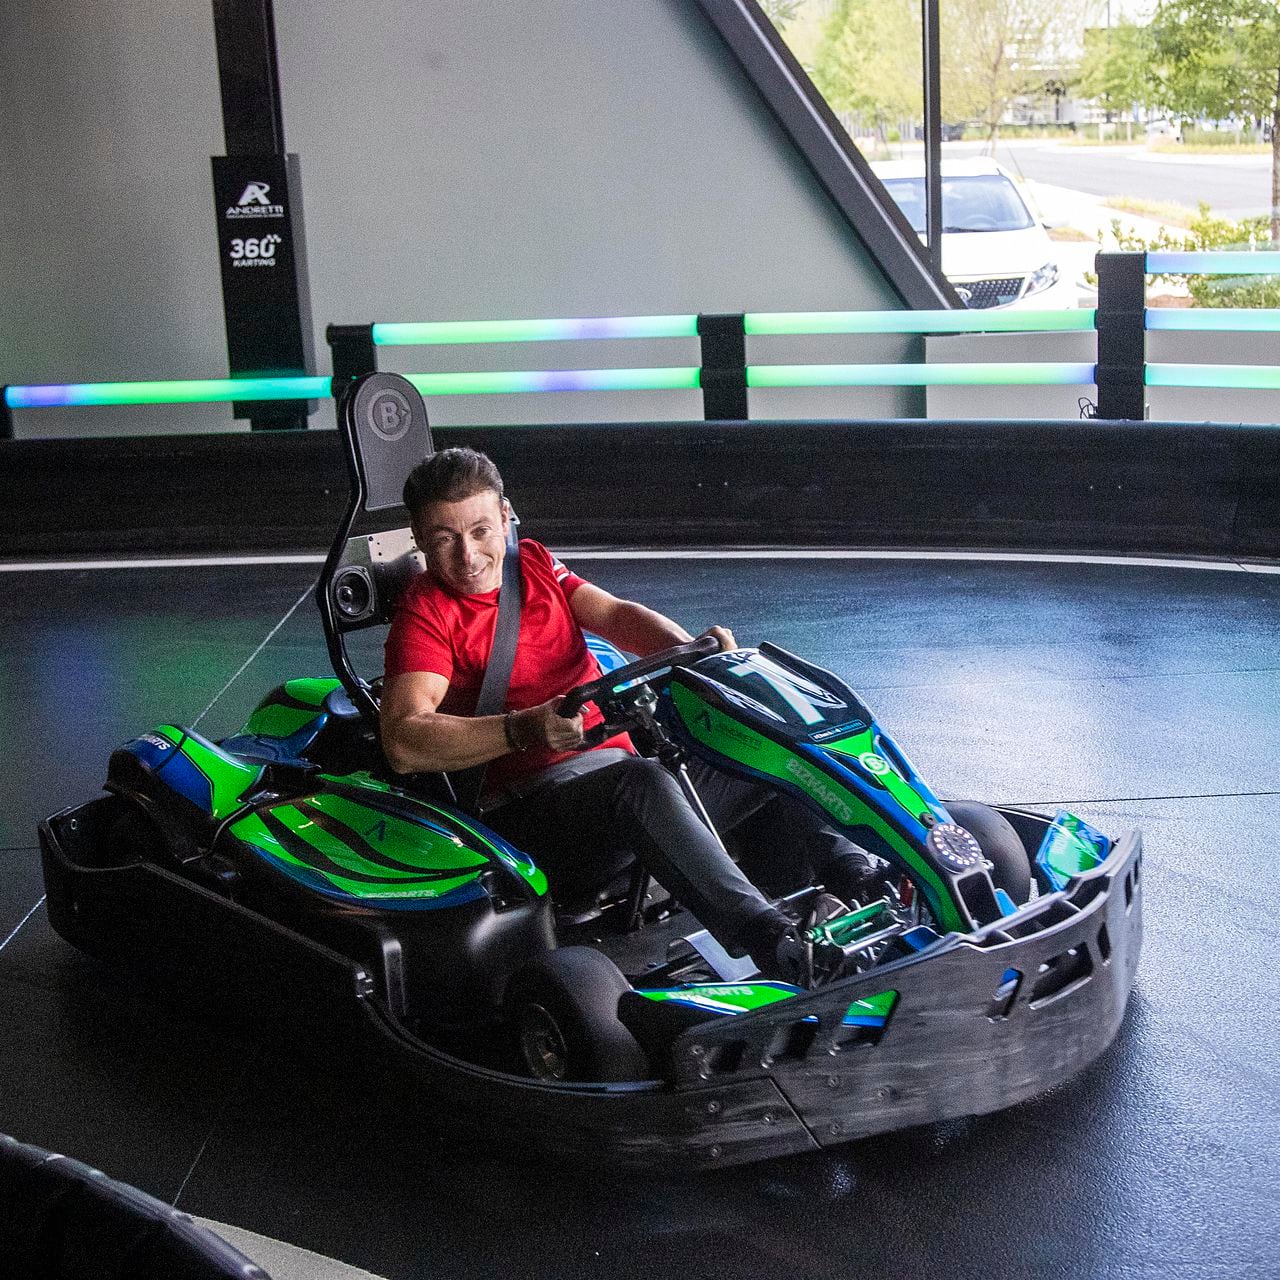 An insider's guide to Andretti Indoor Karting and Games